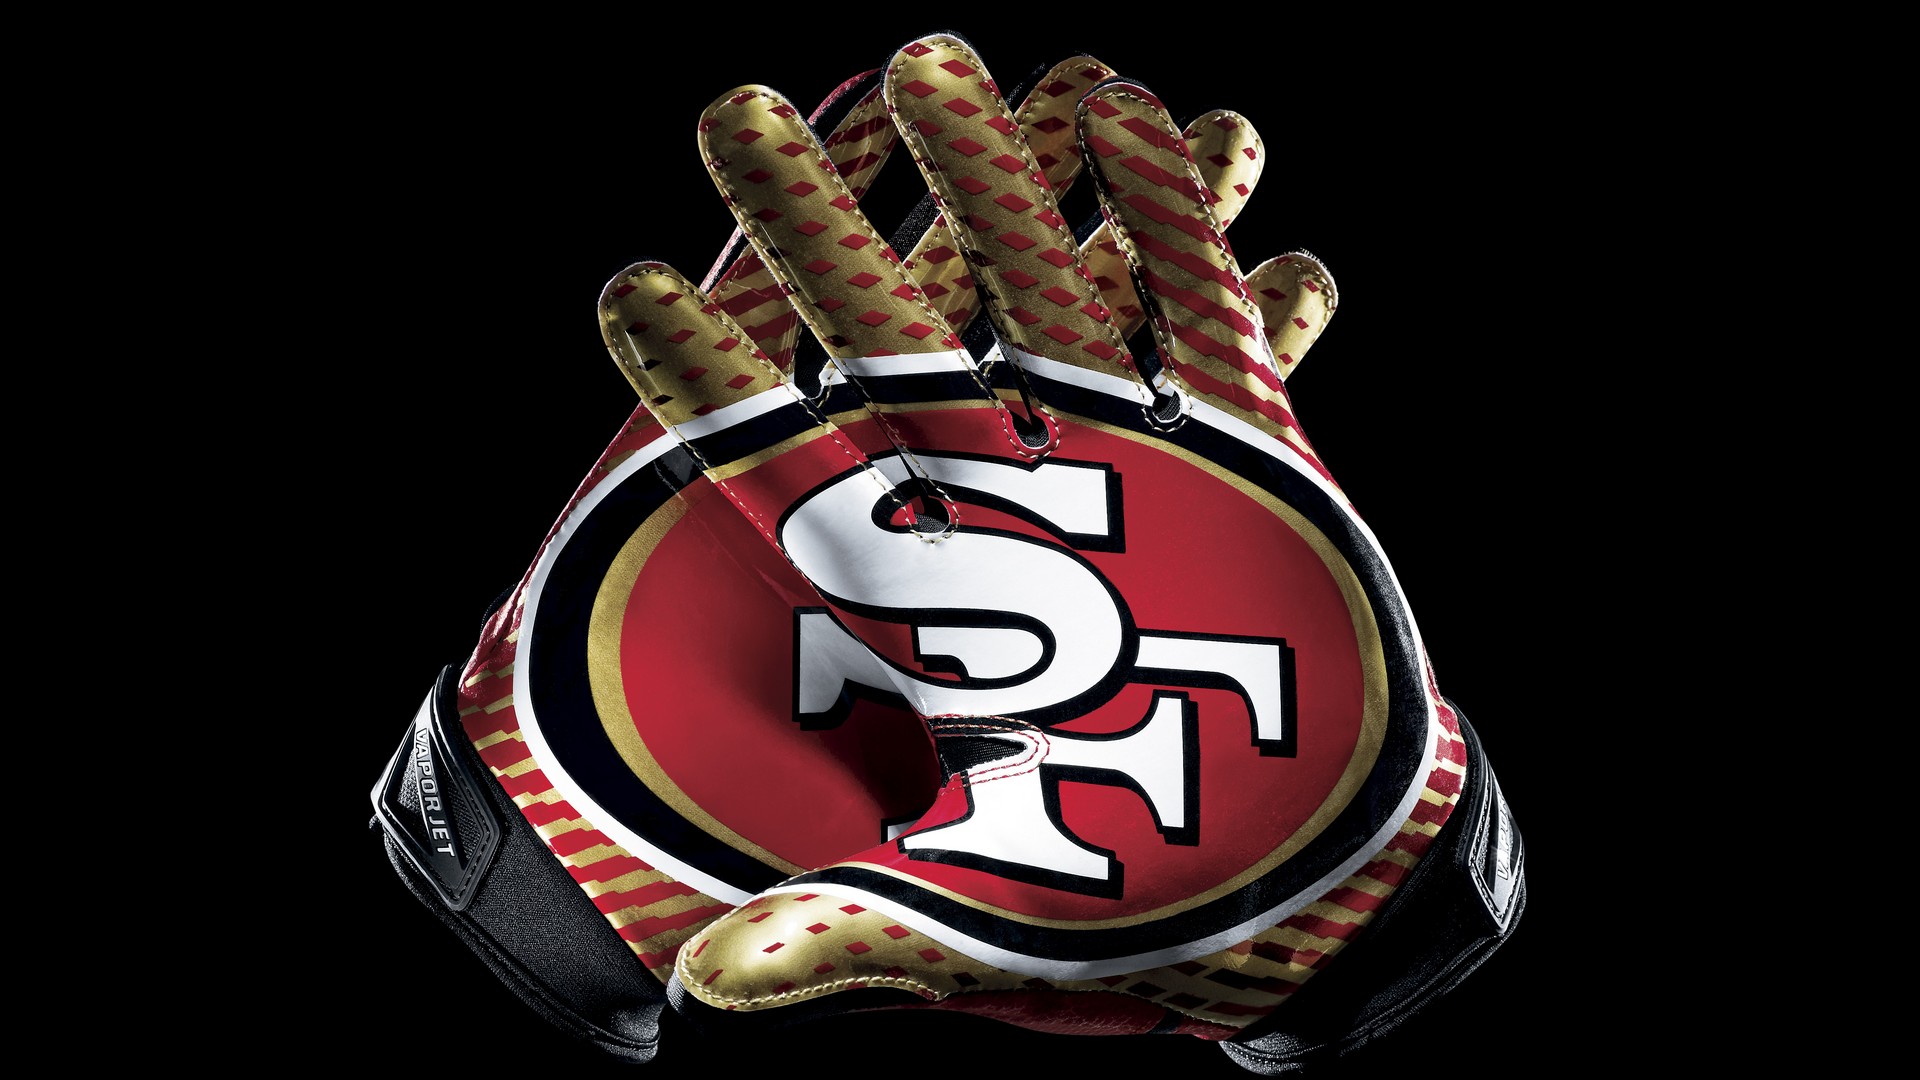 Wallpapers San Francisco 49ers With high-resolution 1920X1080 pixel. You can use this wallpaper for your Mac or Windows Desktop Background, iPhone, Android or Tablet and another Smartphone device